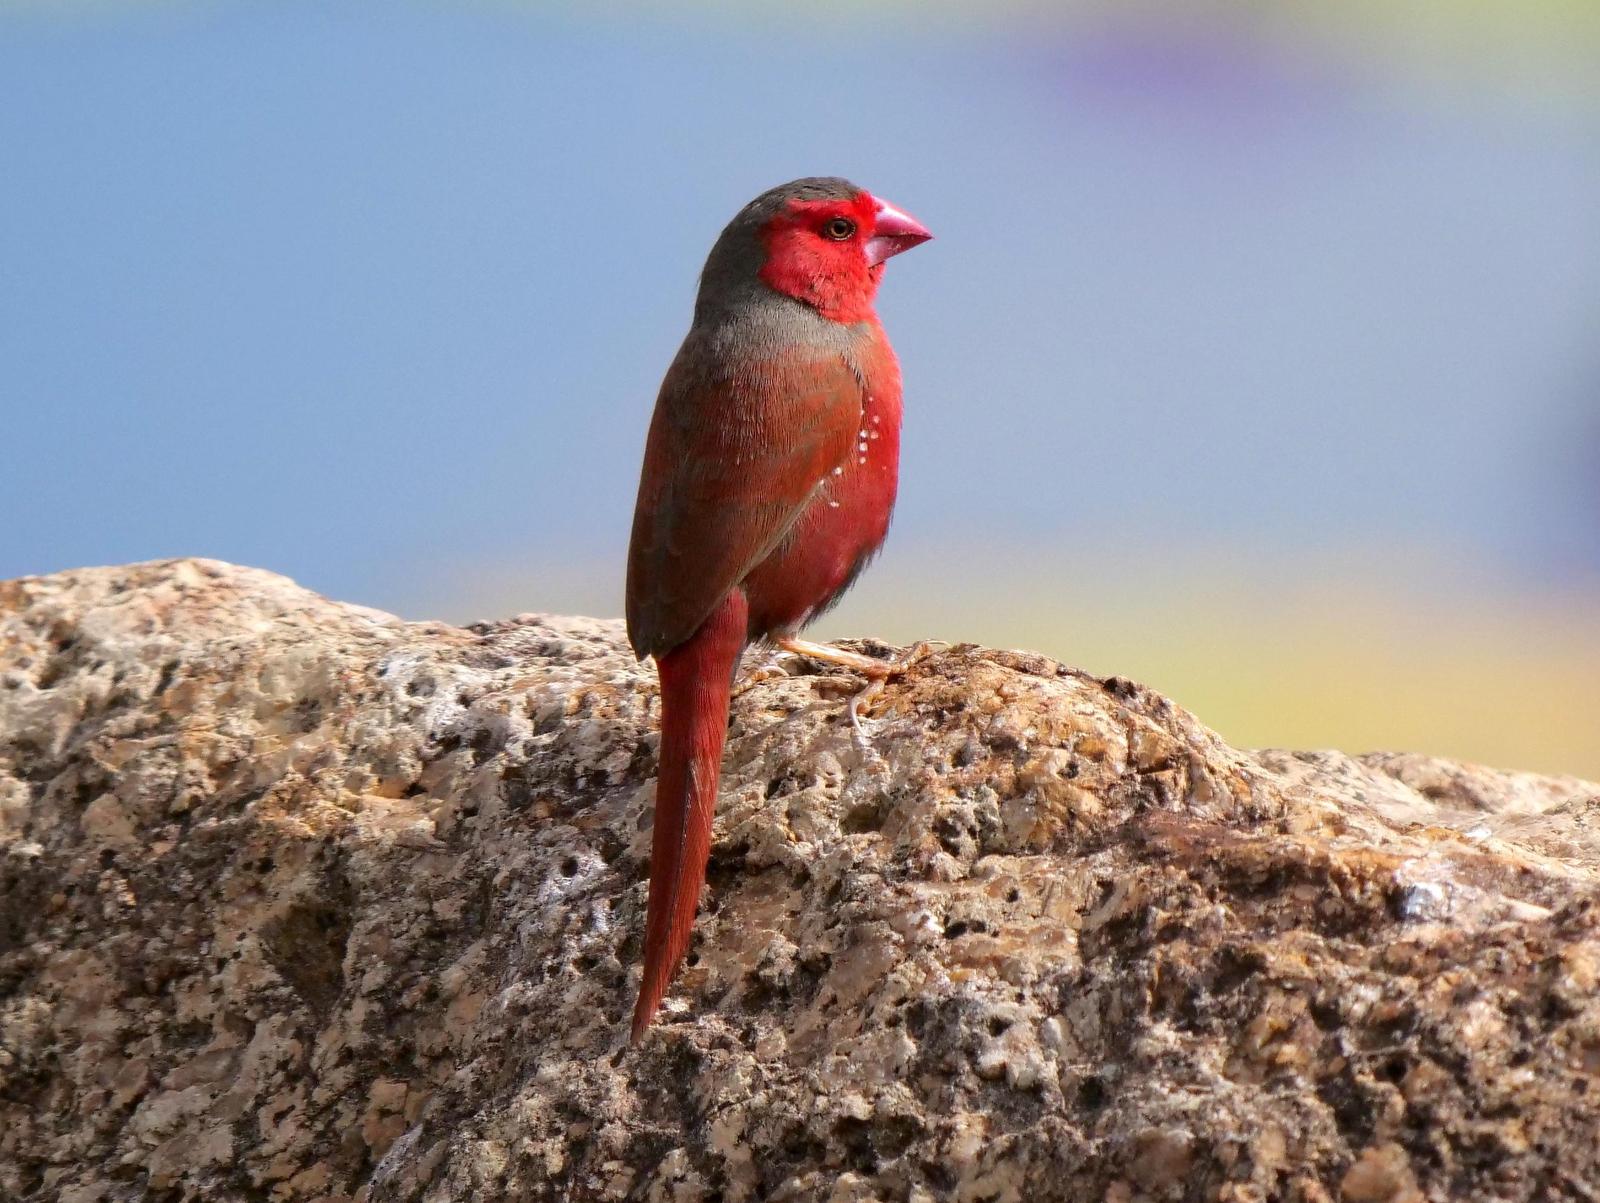 Crimson Finch Photo by Peter Lowe